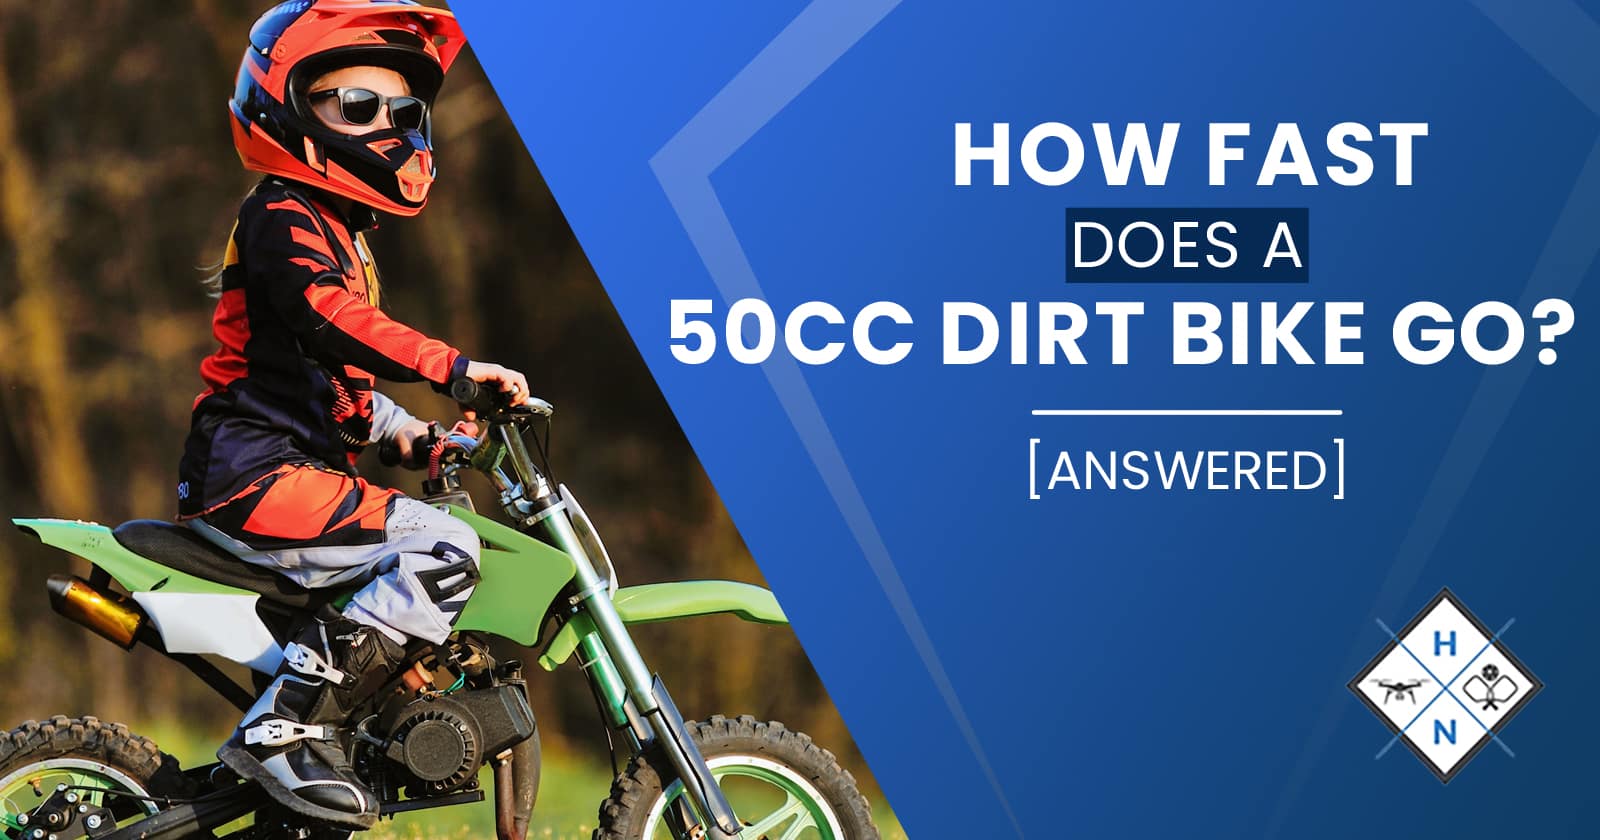 How Fast Does a 50cc Dirt Bike Go? [ANSWERED]